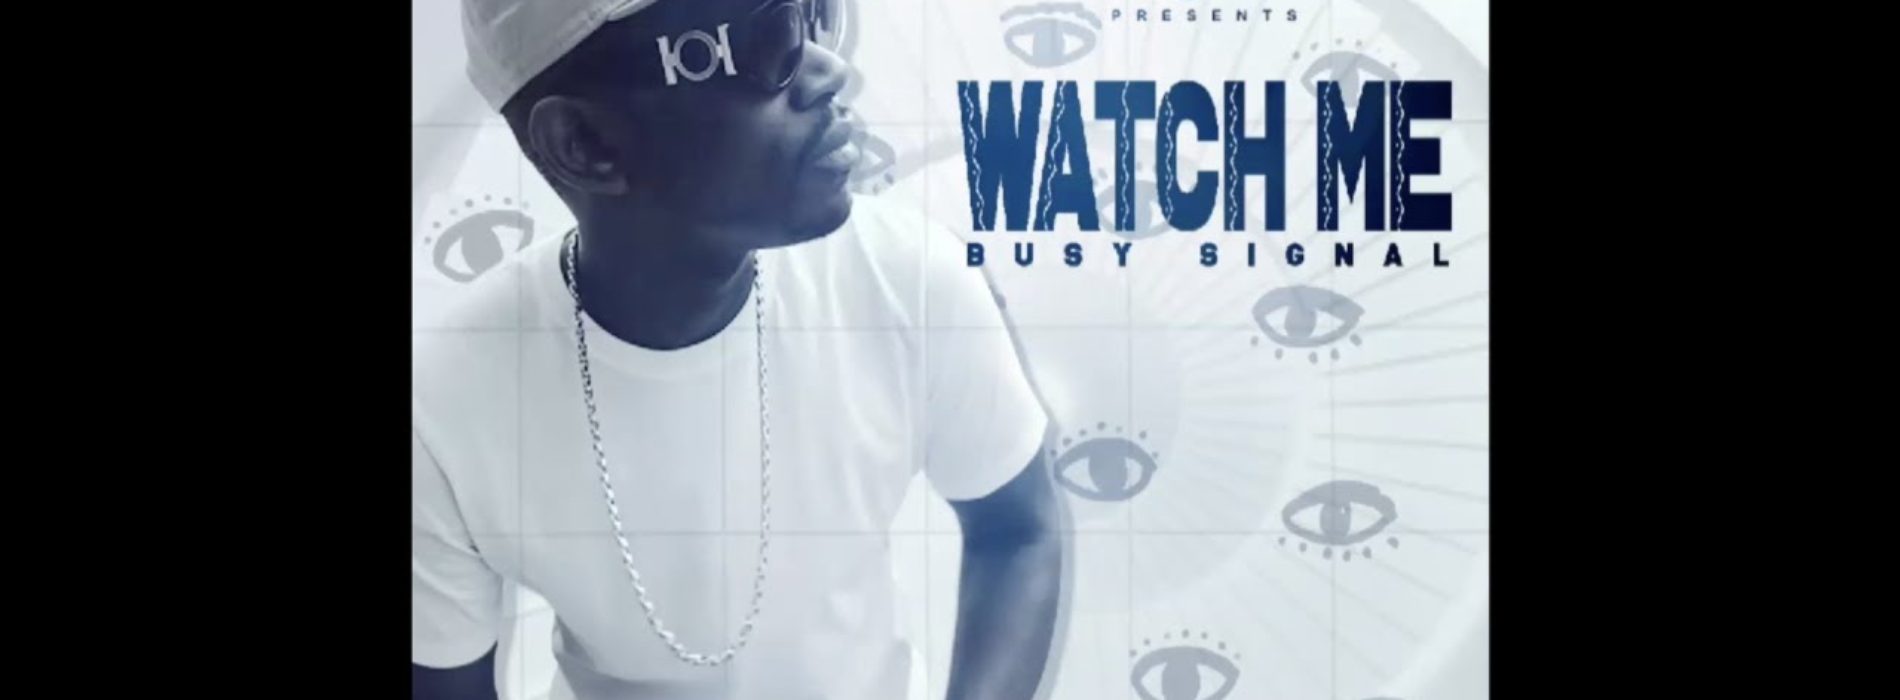 Busy Signal – Search No More // Watch Me (Official Audio) – Juillet 2020